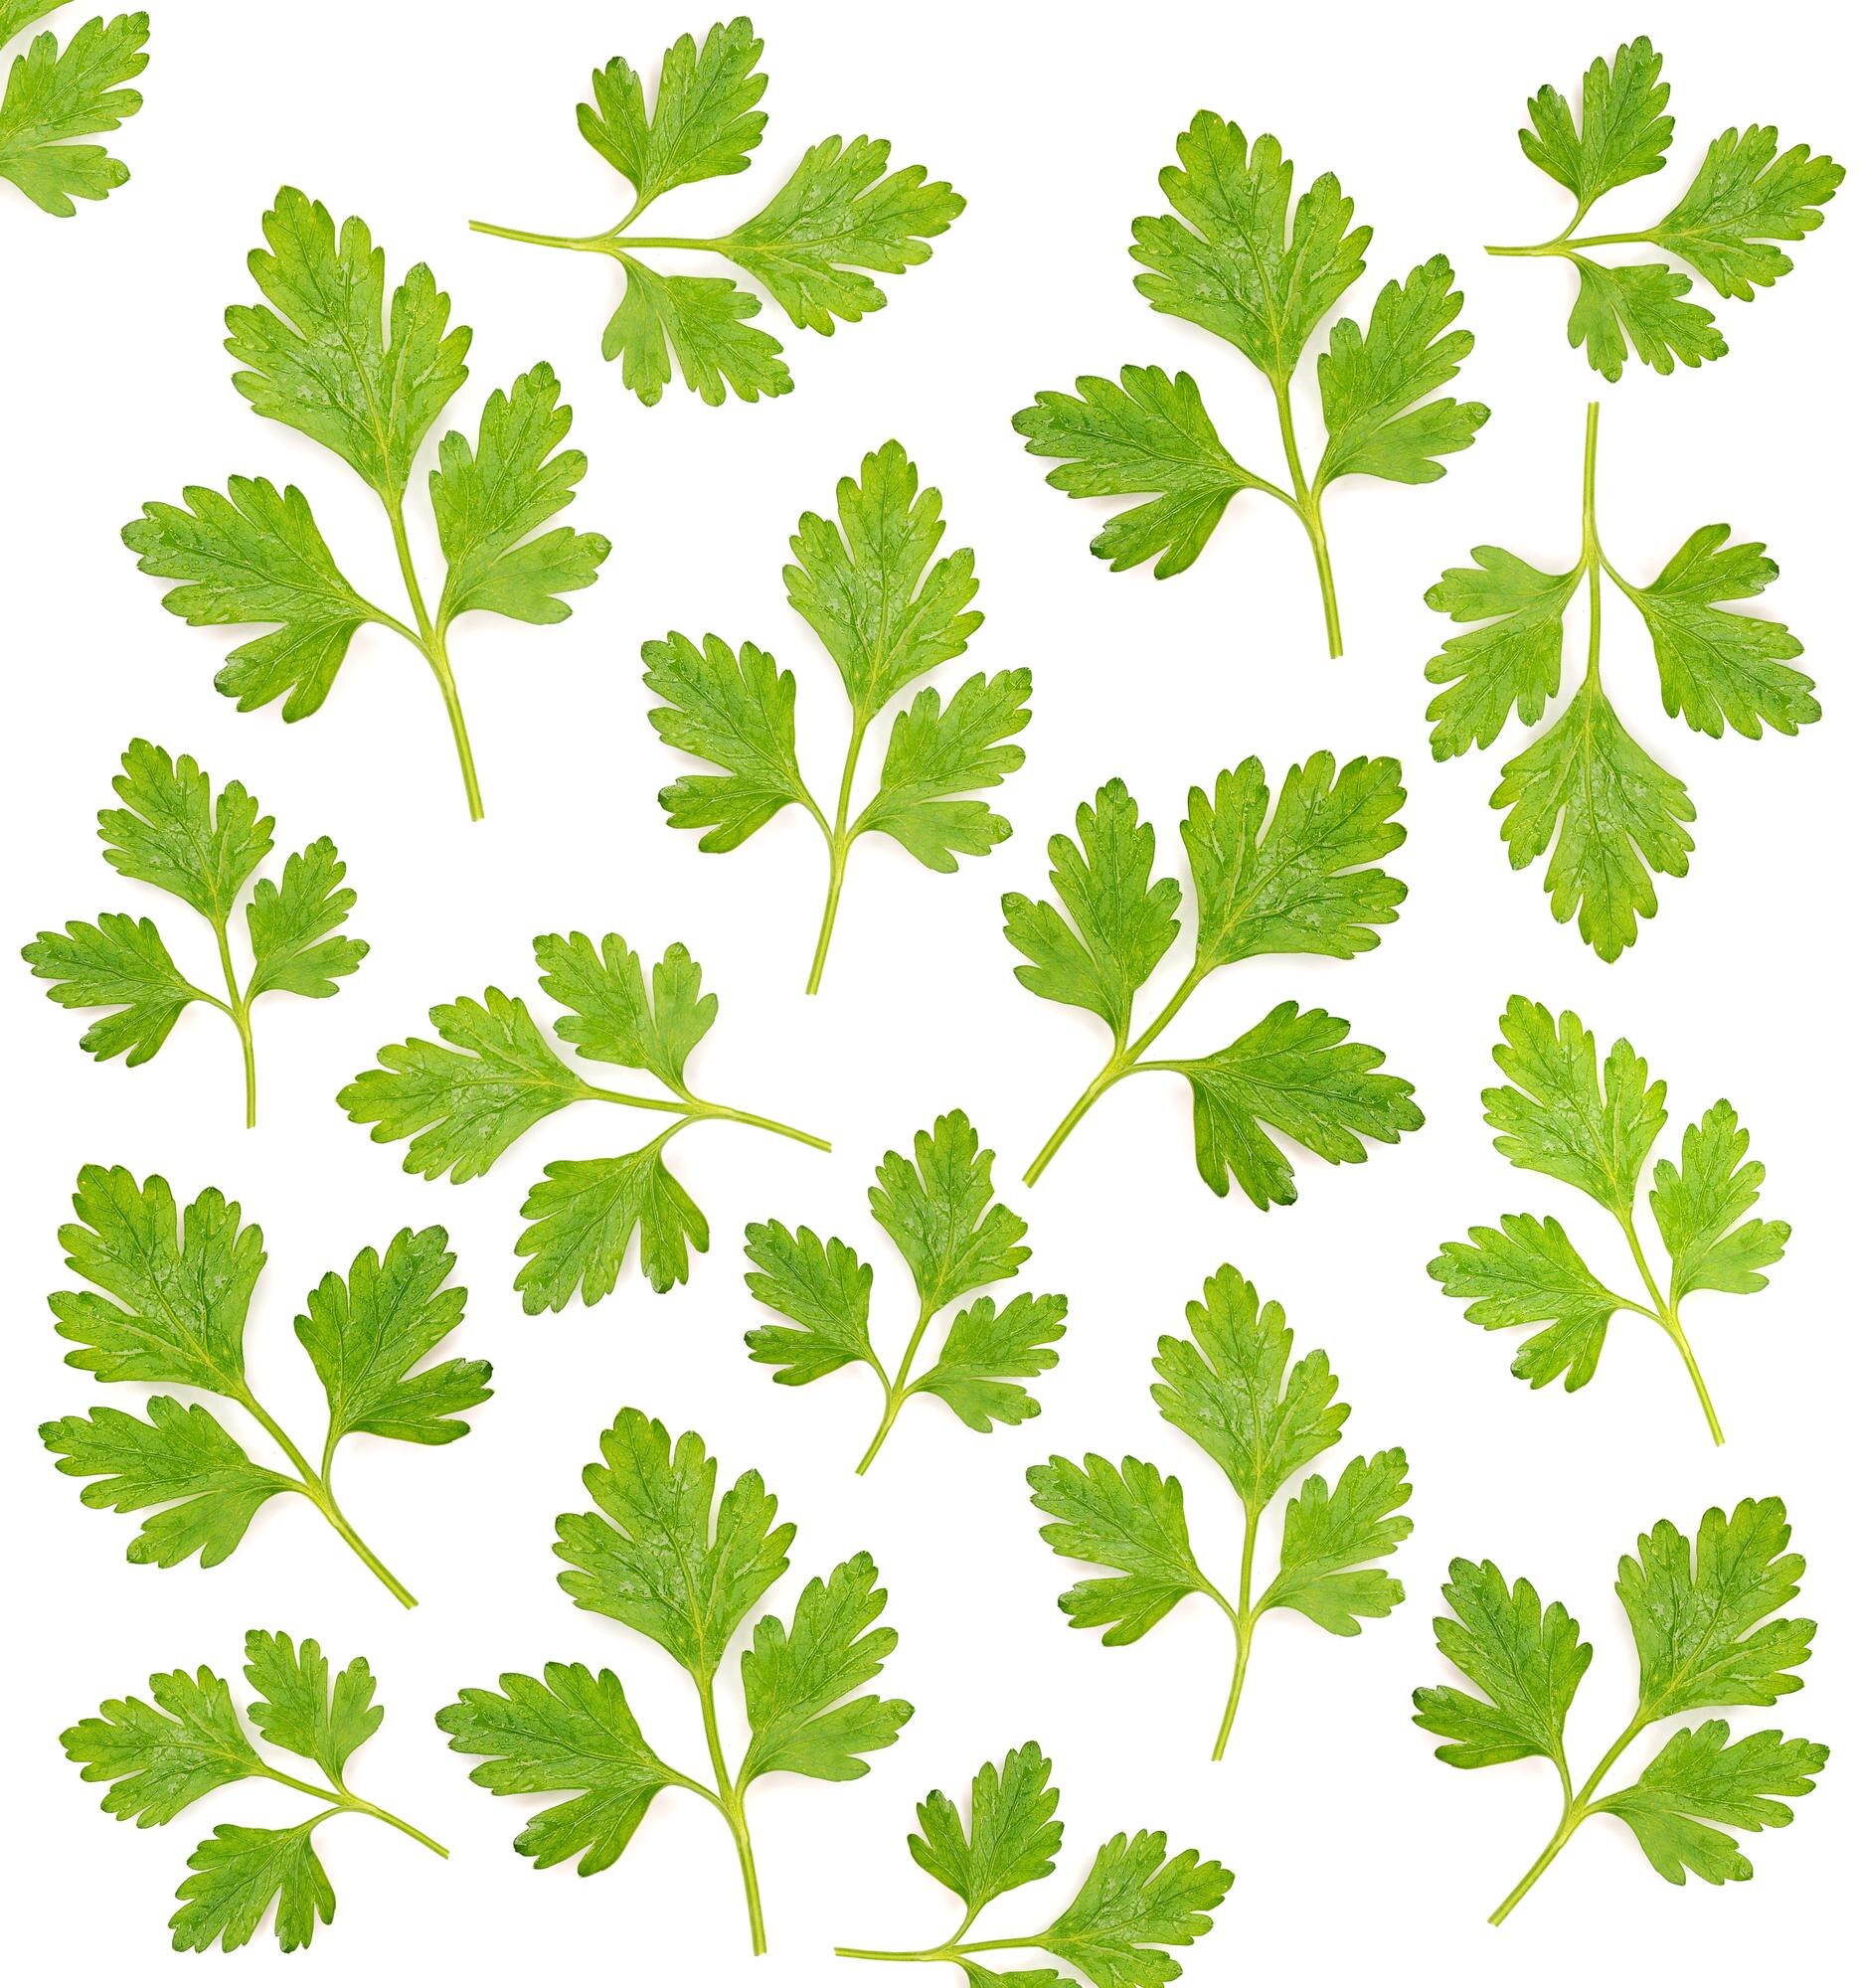 79,000+ Coriander Leaves Pictures